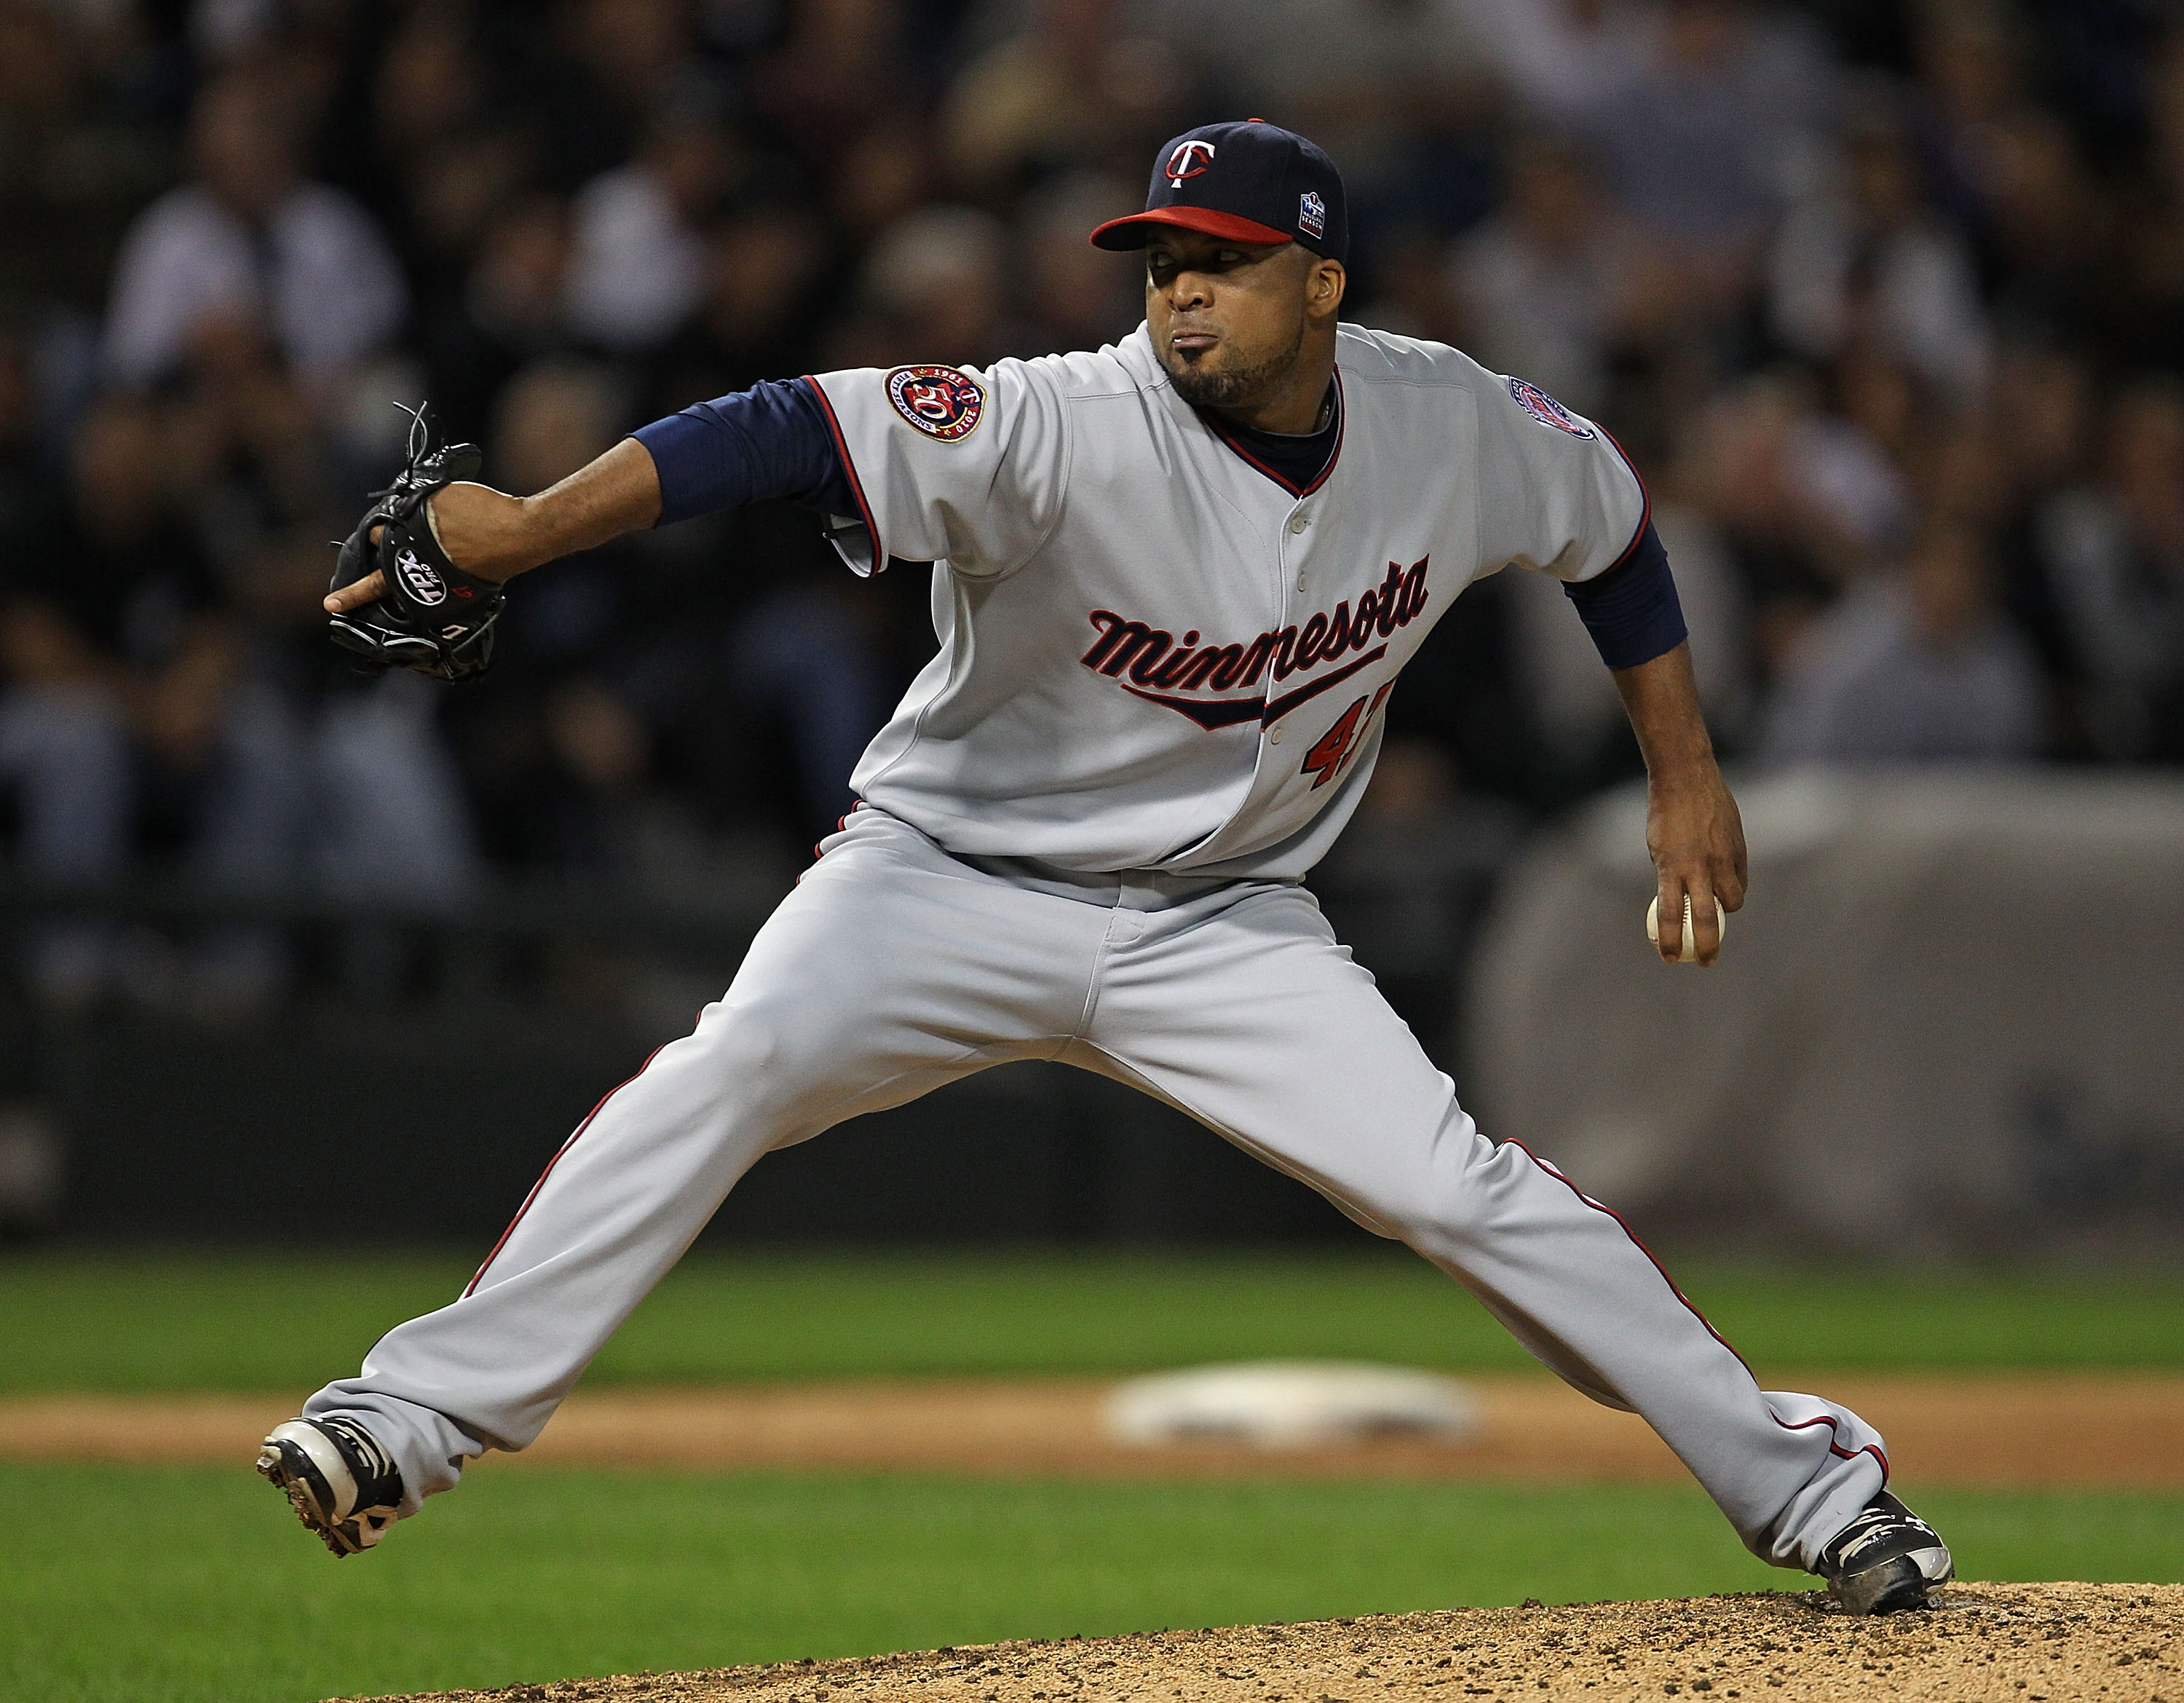 CHICAGO - SEPTEMBER 14: Starting pitcher Francisco Liriano #47 of the Minnesota Twins delivers the ball against the Chicago White Sox at U.S. Cellular Field on September 14, 2010 in Chicago, Illinois. (Photo by Jonathan Daniel/Getty Images)